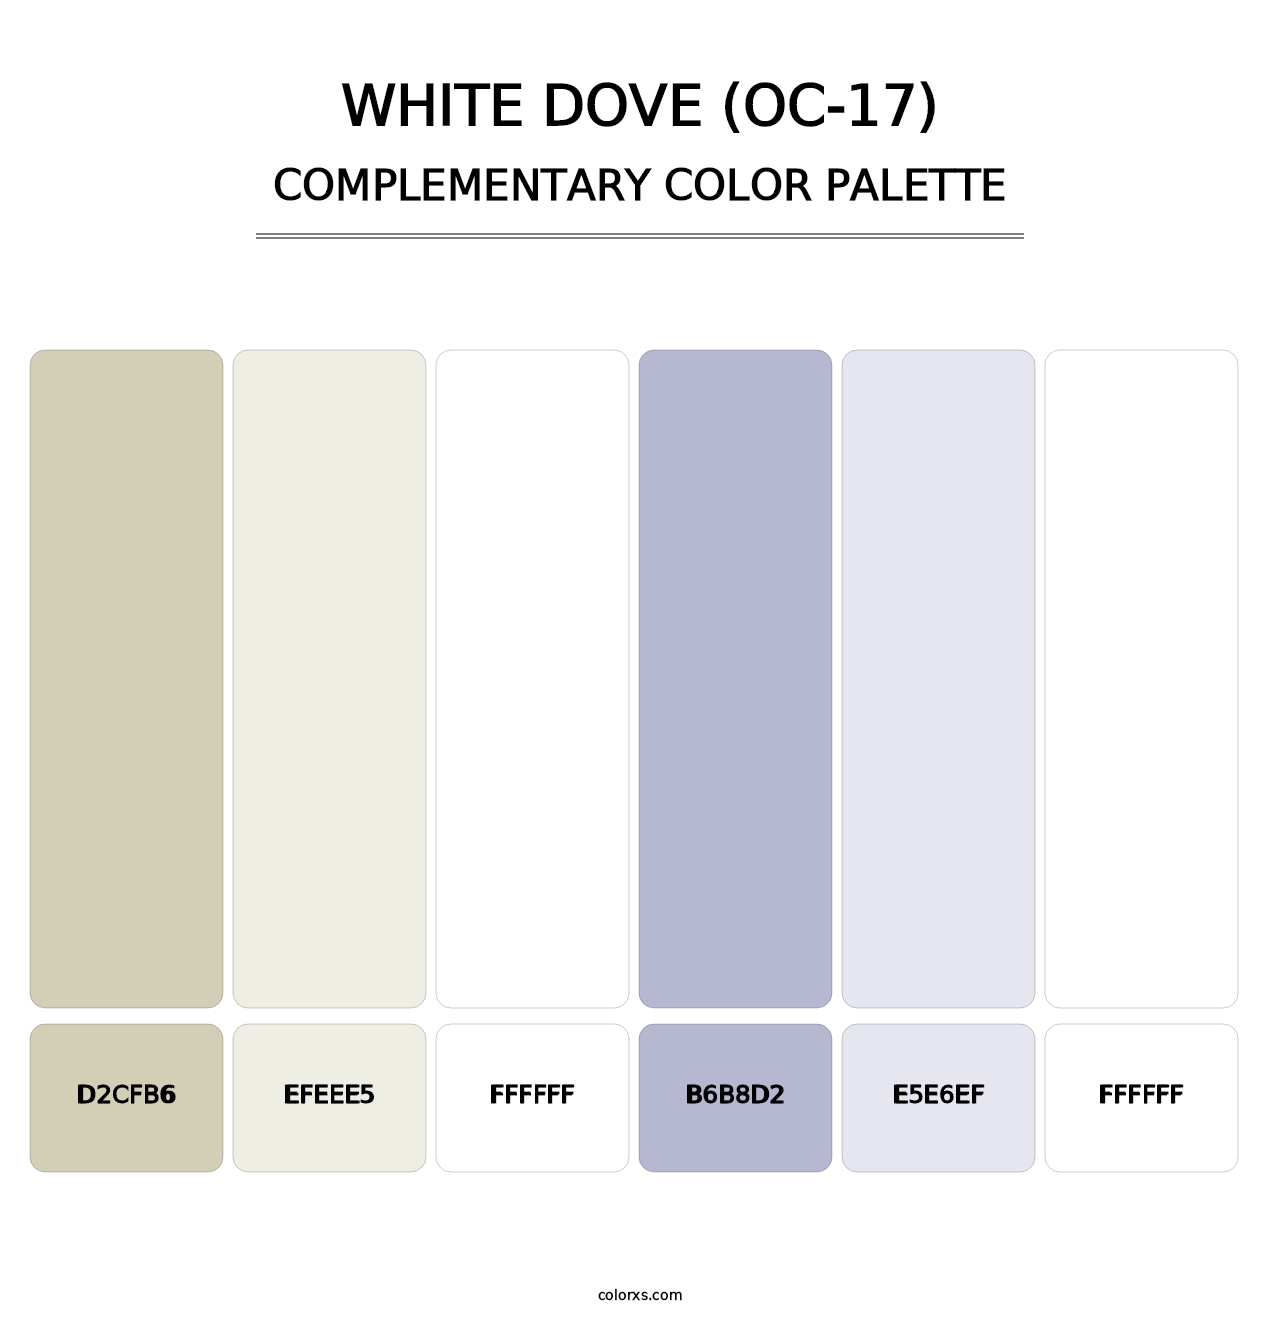 White Dove (OC-17) - Complementary Color Palette